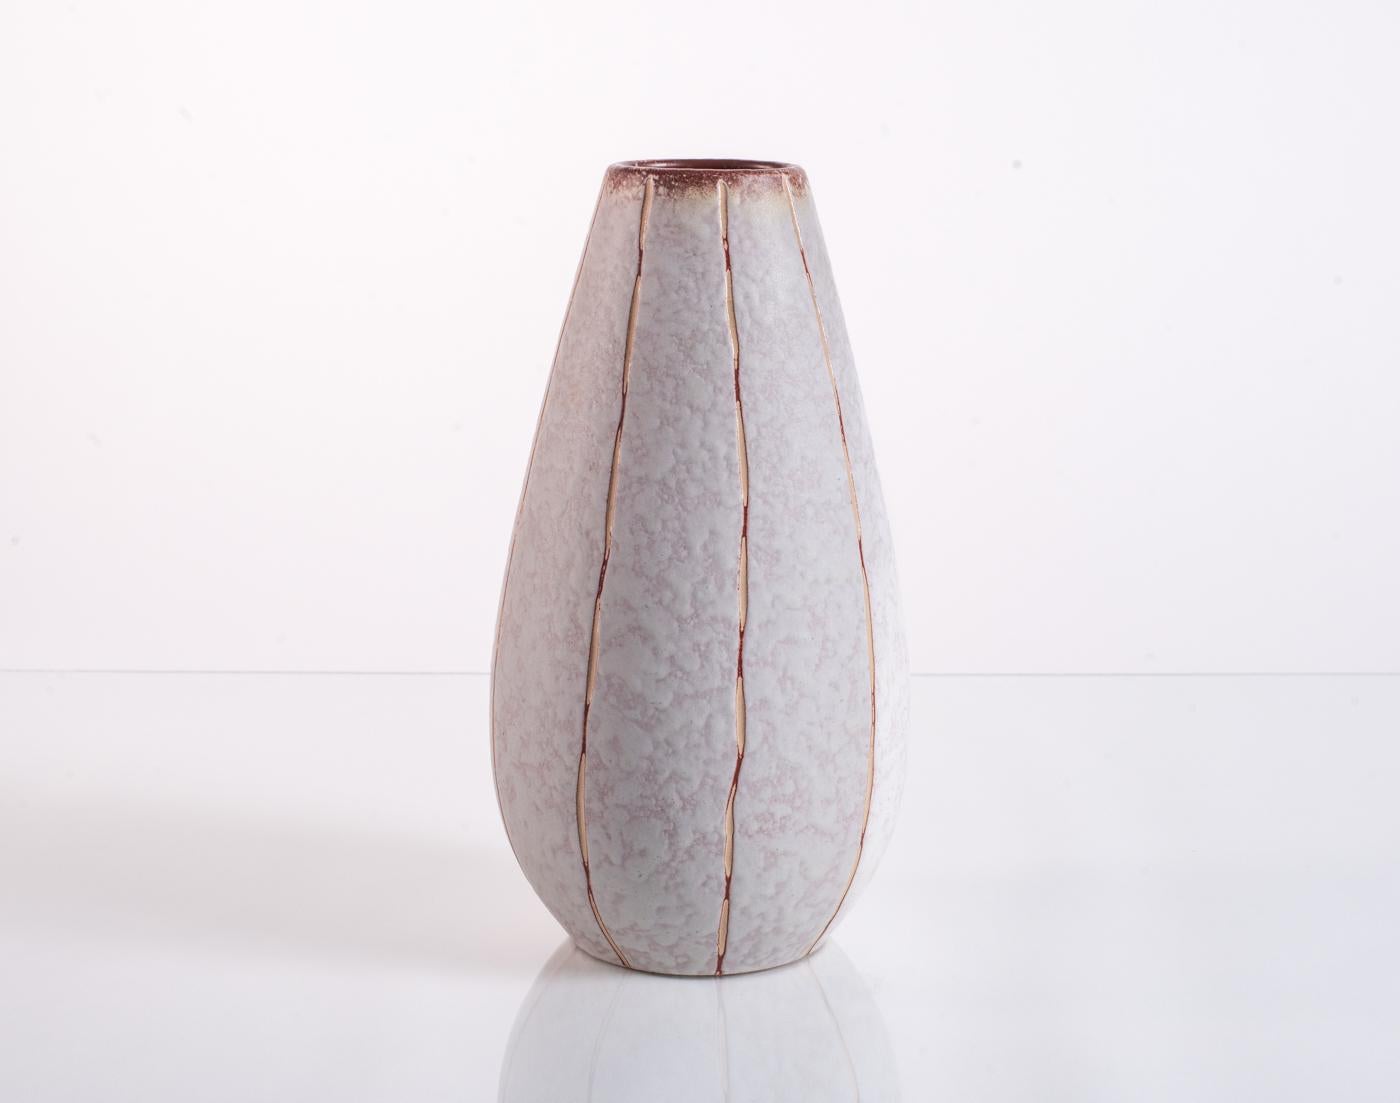 A minimalist ceramic cone vase by Ü-Keramik (Uebelacker) with rugged vertical striations against a pink and white mottled glaze. Numbered in the base. Form 455/25.

Ü Keramik, or Üebelacker Keramik, was founded in 1909 in West Germany by Johann